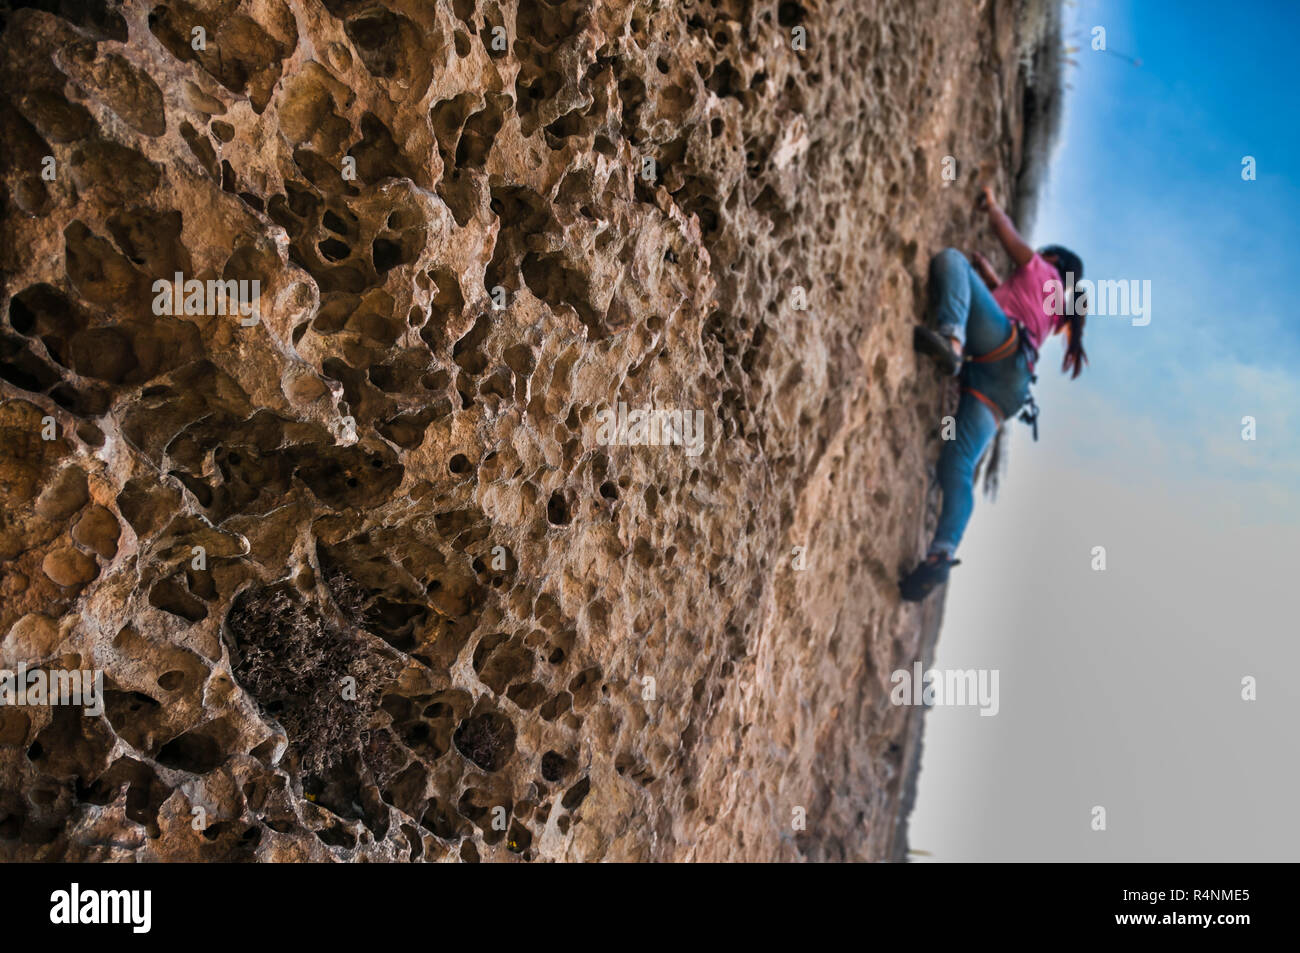 View from below of woman rock climbing up cliff, Â Suesca, Â Almeidas Province, Â Colombia Stock Photo